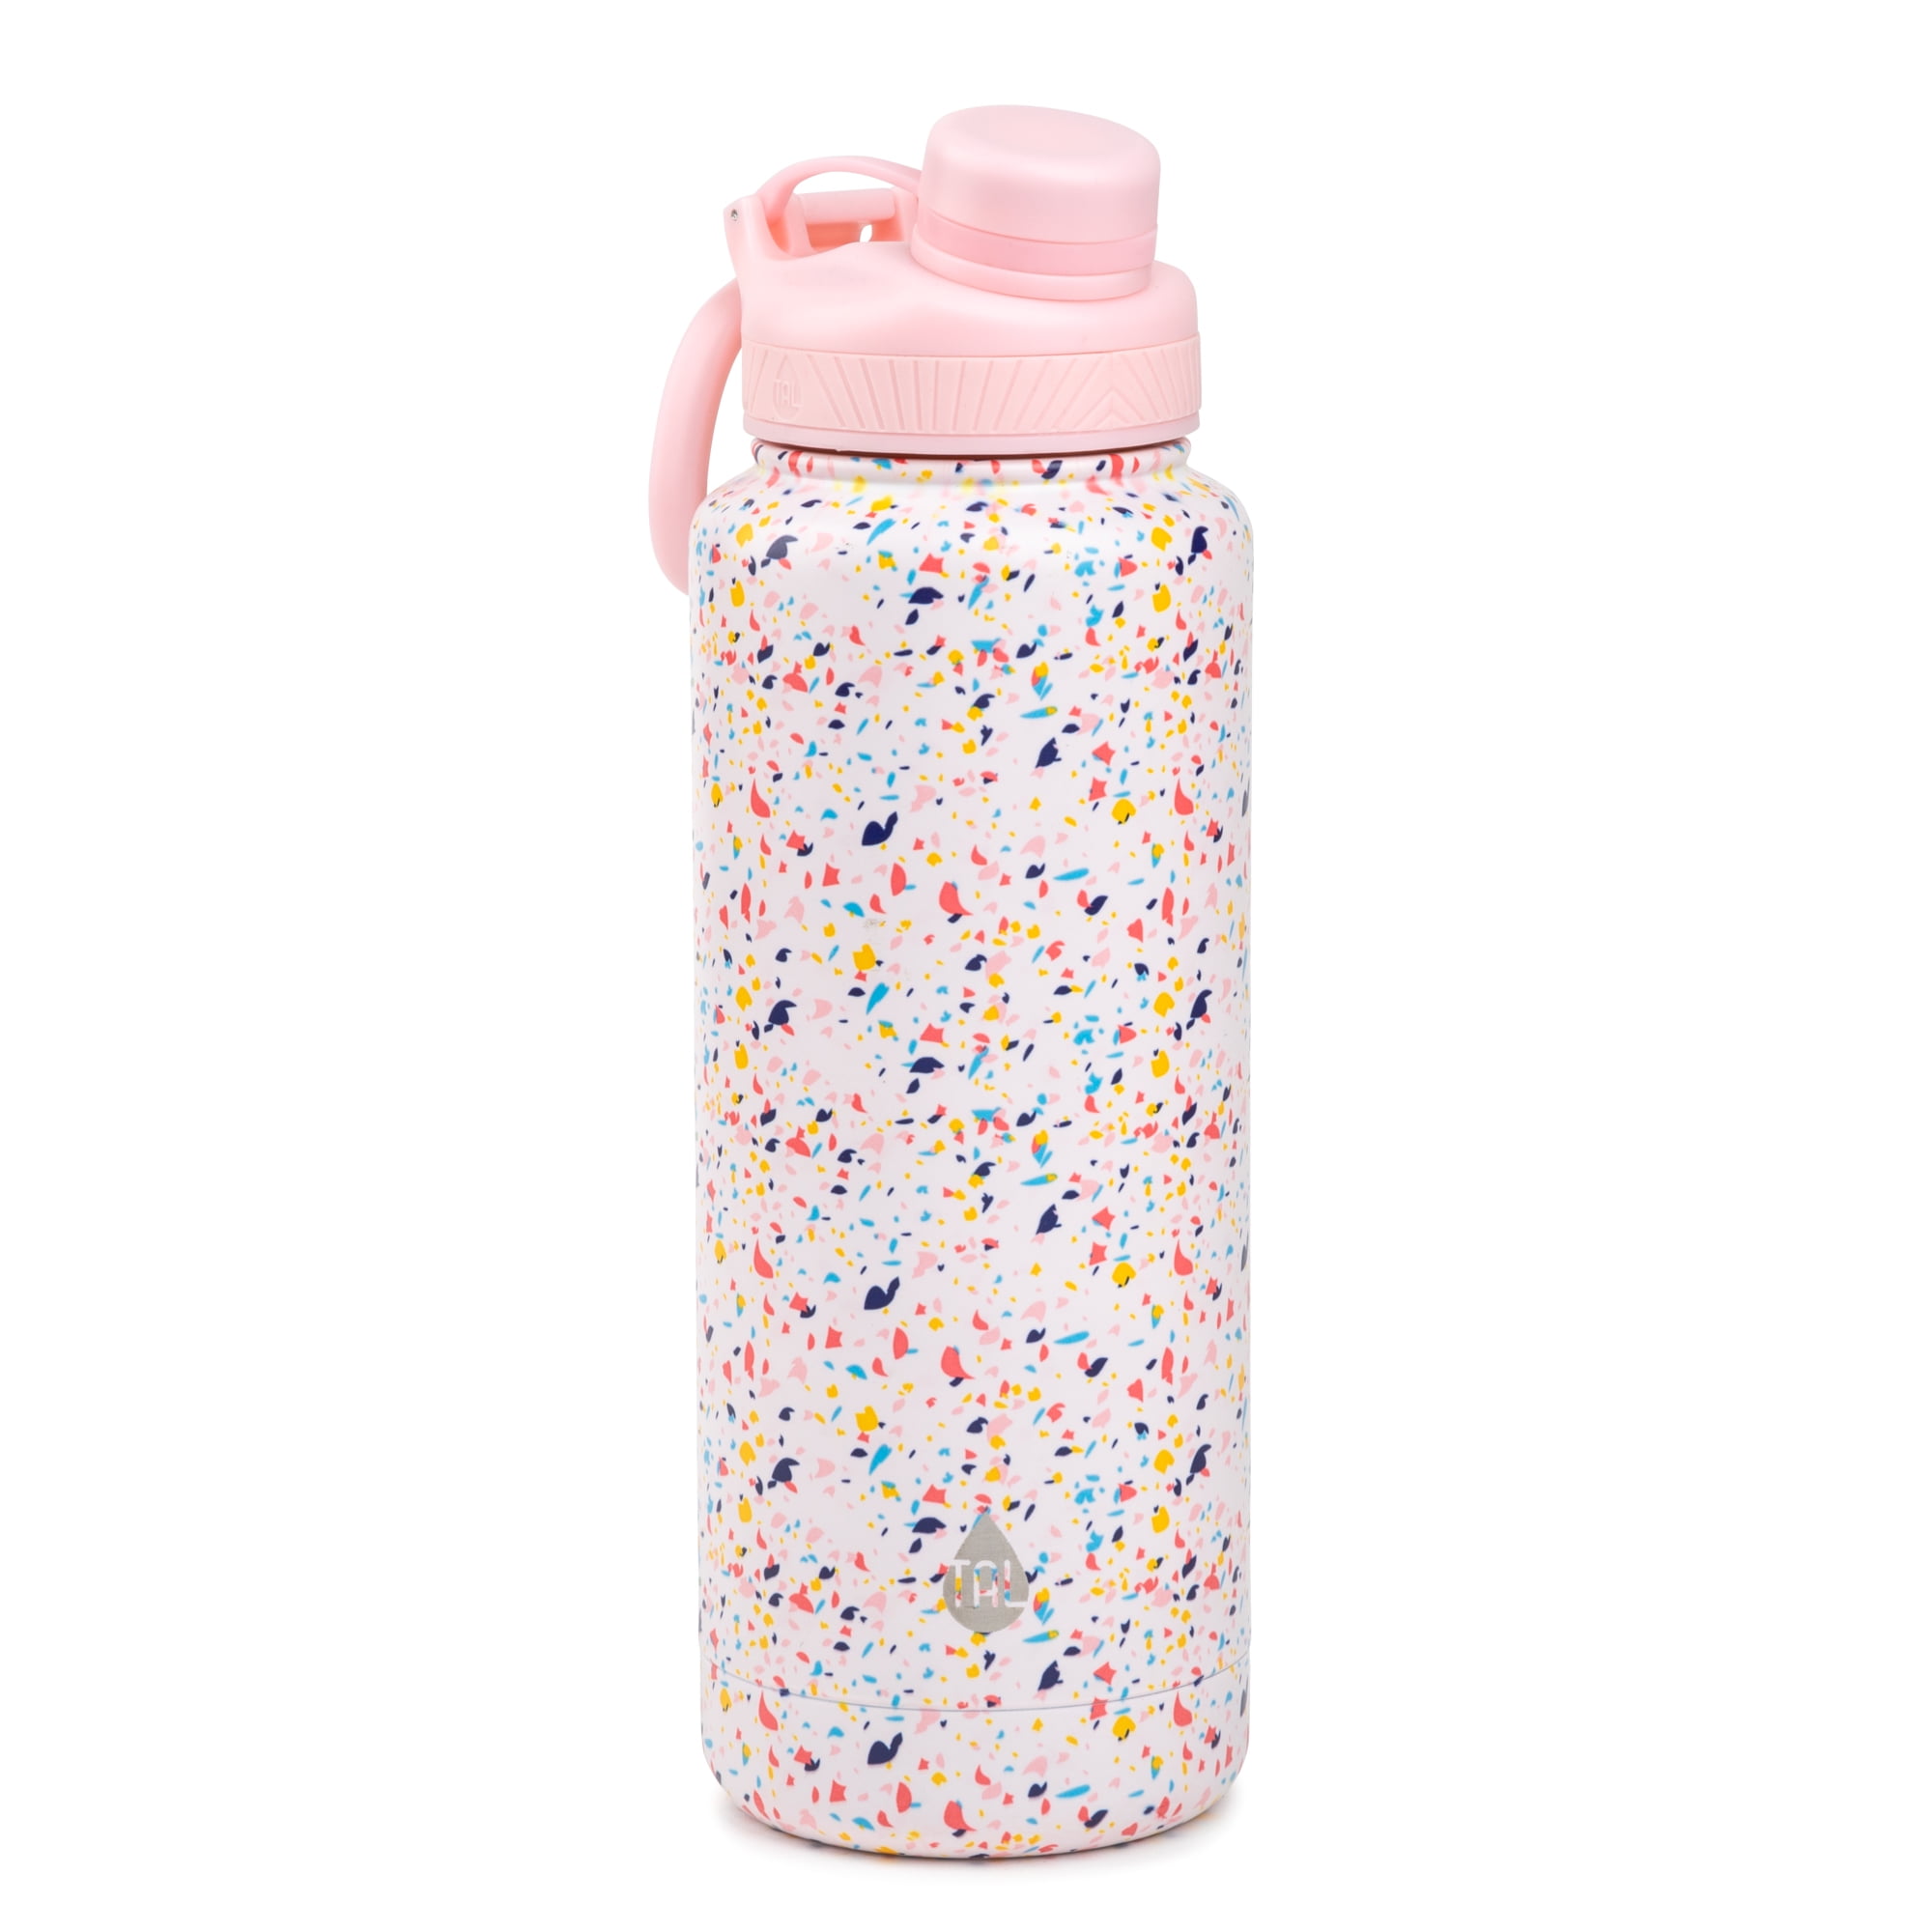 TAL 40 oz Confetti Insulated Stainless Steel Water Bottle with Screw Cap and Flip-Top Lid